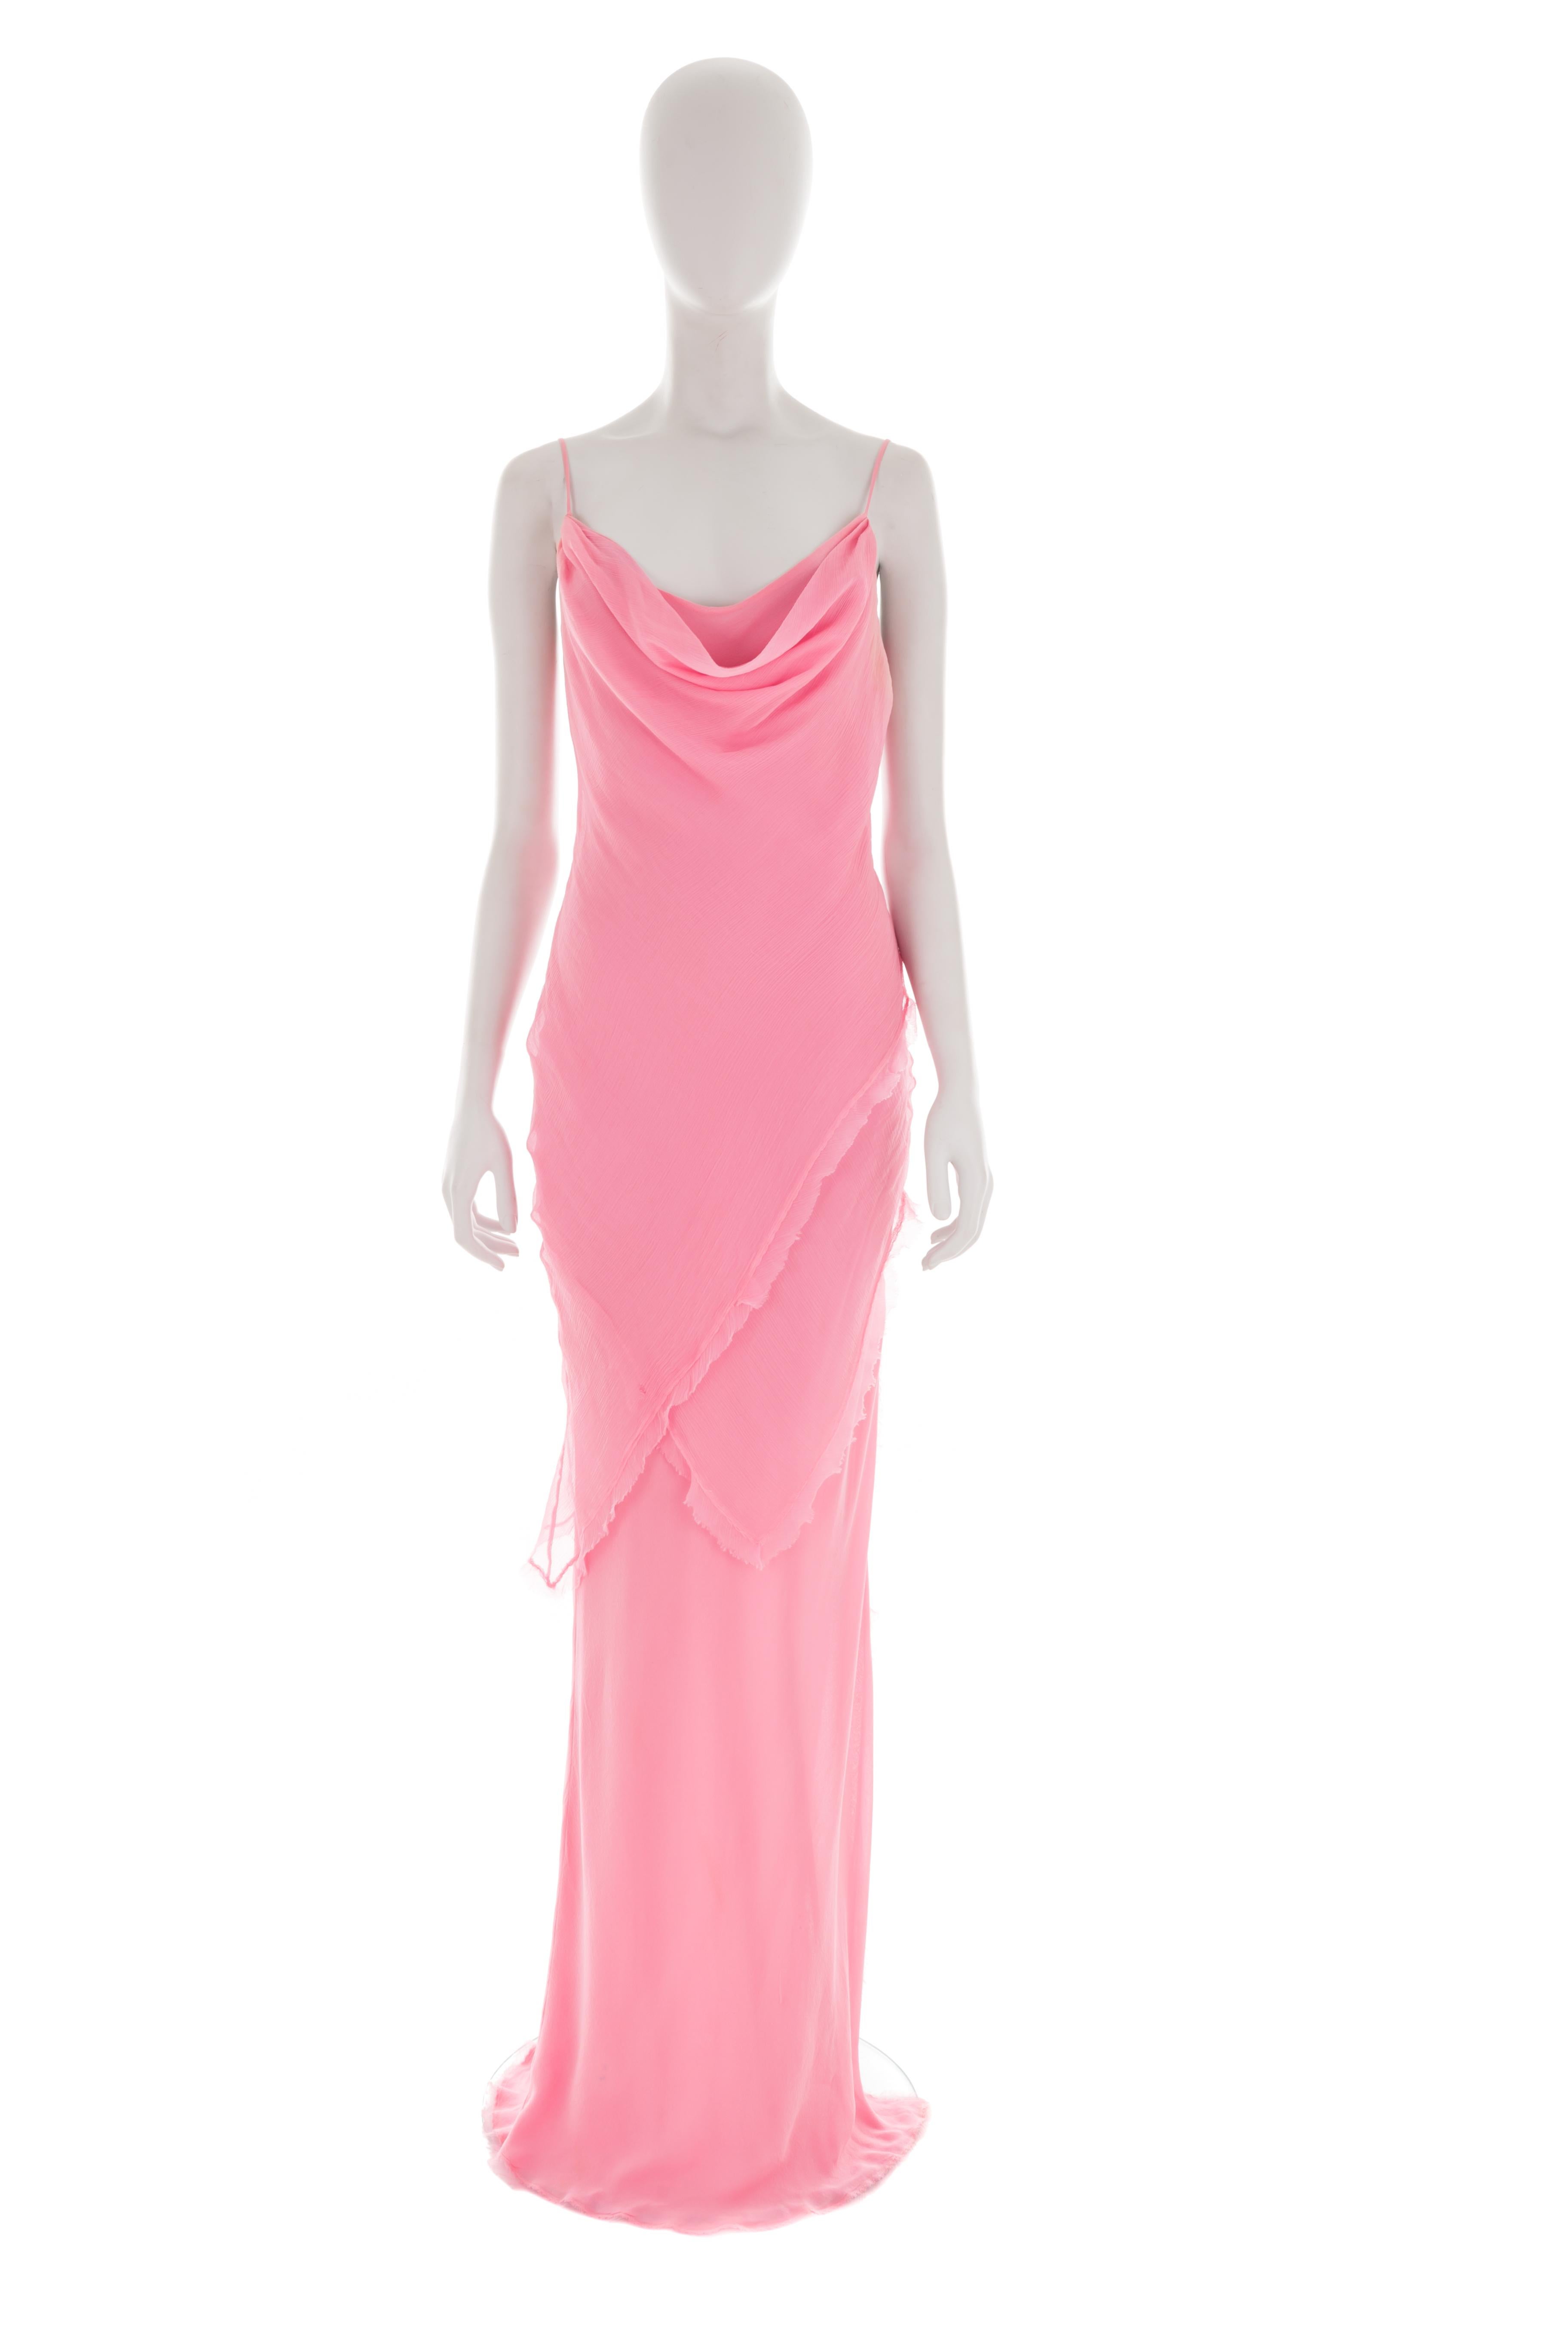 - Ermanno Scervino spring-summer 2004 collection 
- Sold by Gold Palms Vintage
- Pink silk chiffon evening dress
- Asymmetric chiffon double panel with frayed hem 
- Cowl neck
- Side slit
- Yellowing in both underarm areas
- Small hole in the front